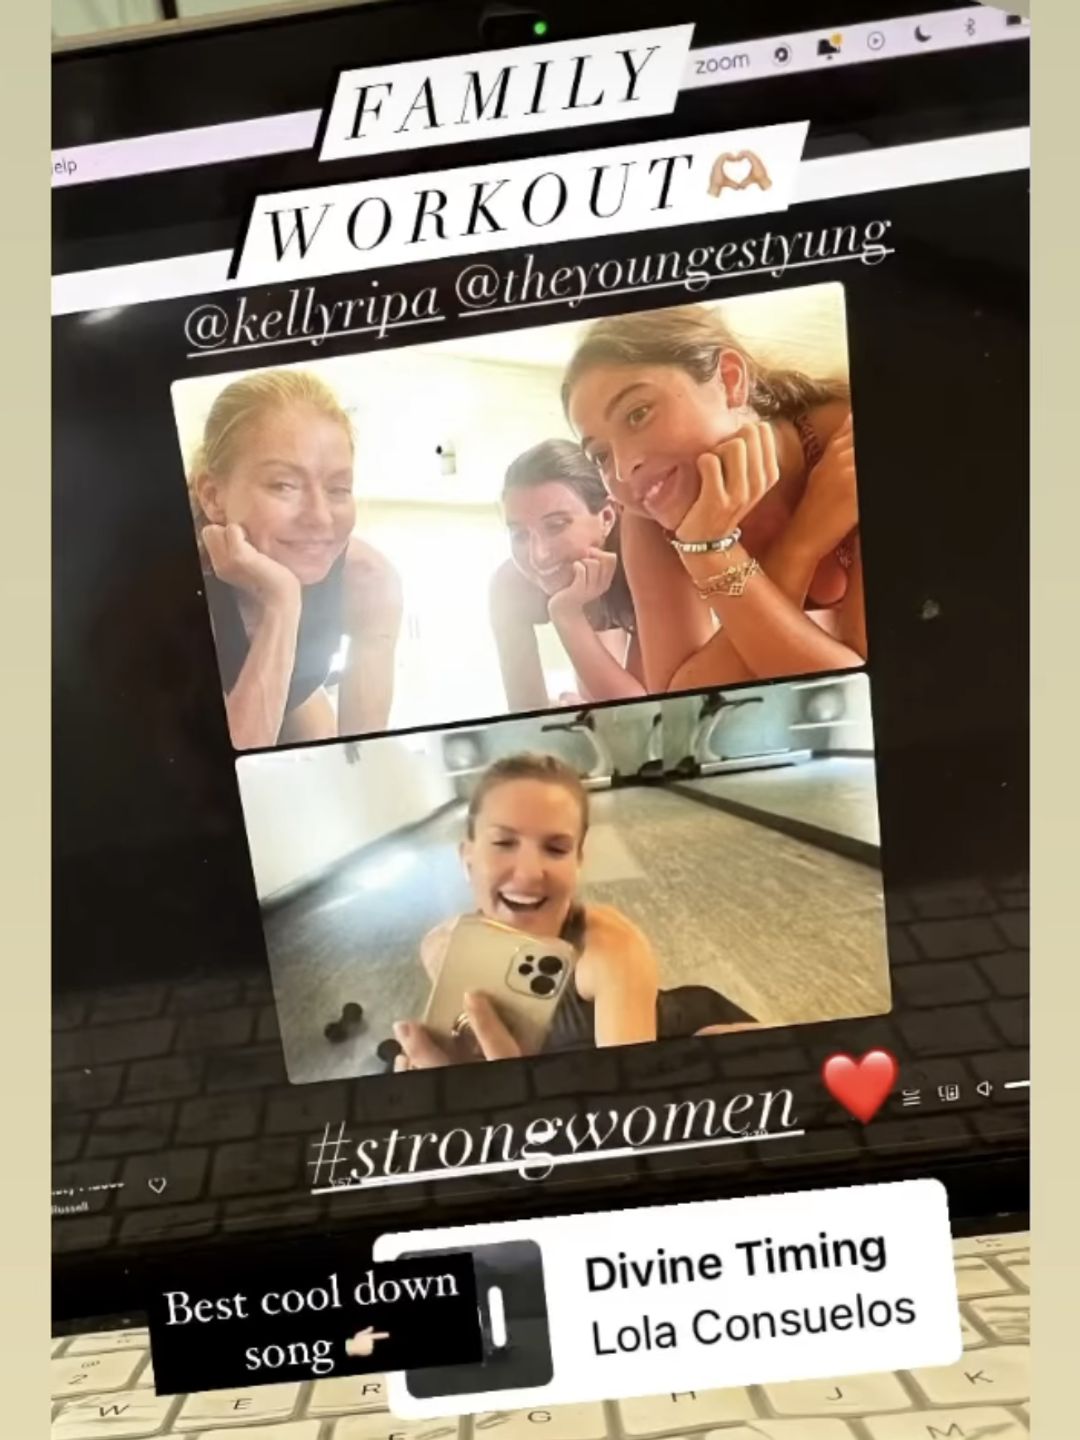 Kelly Ripa worked out with her daughter Lola